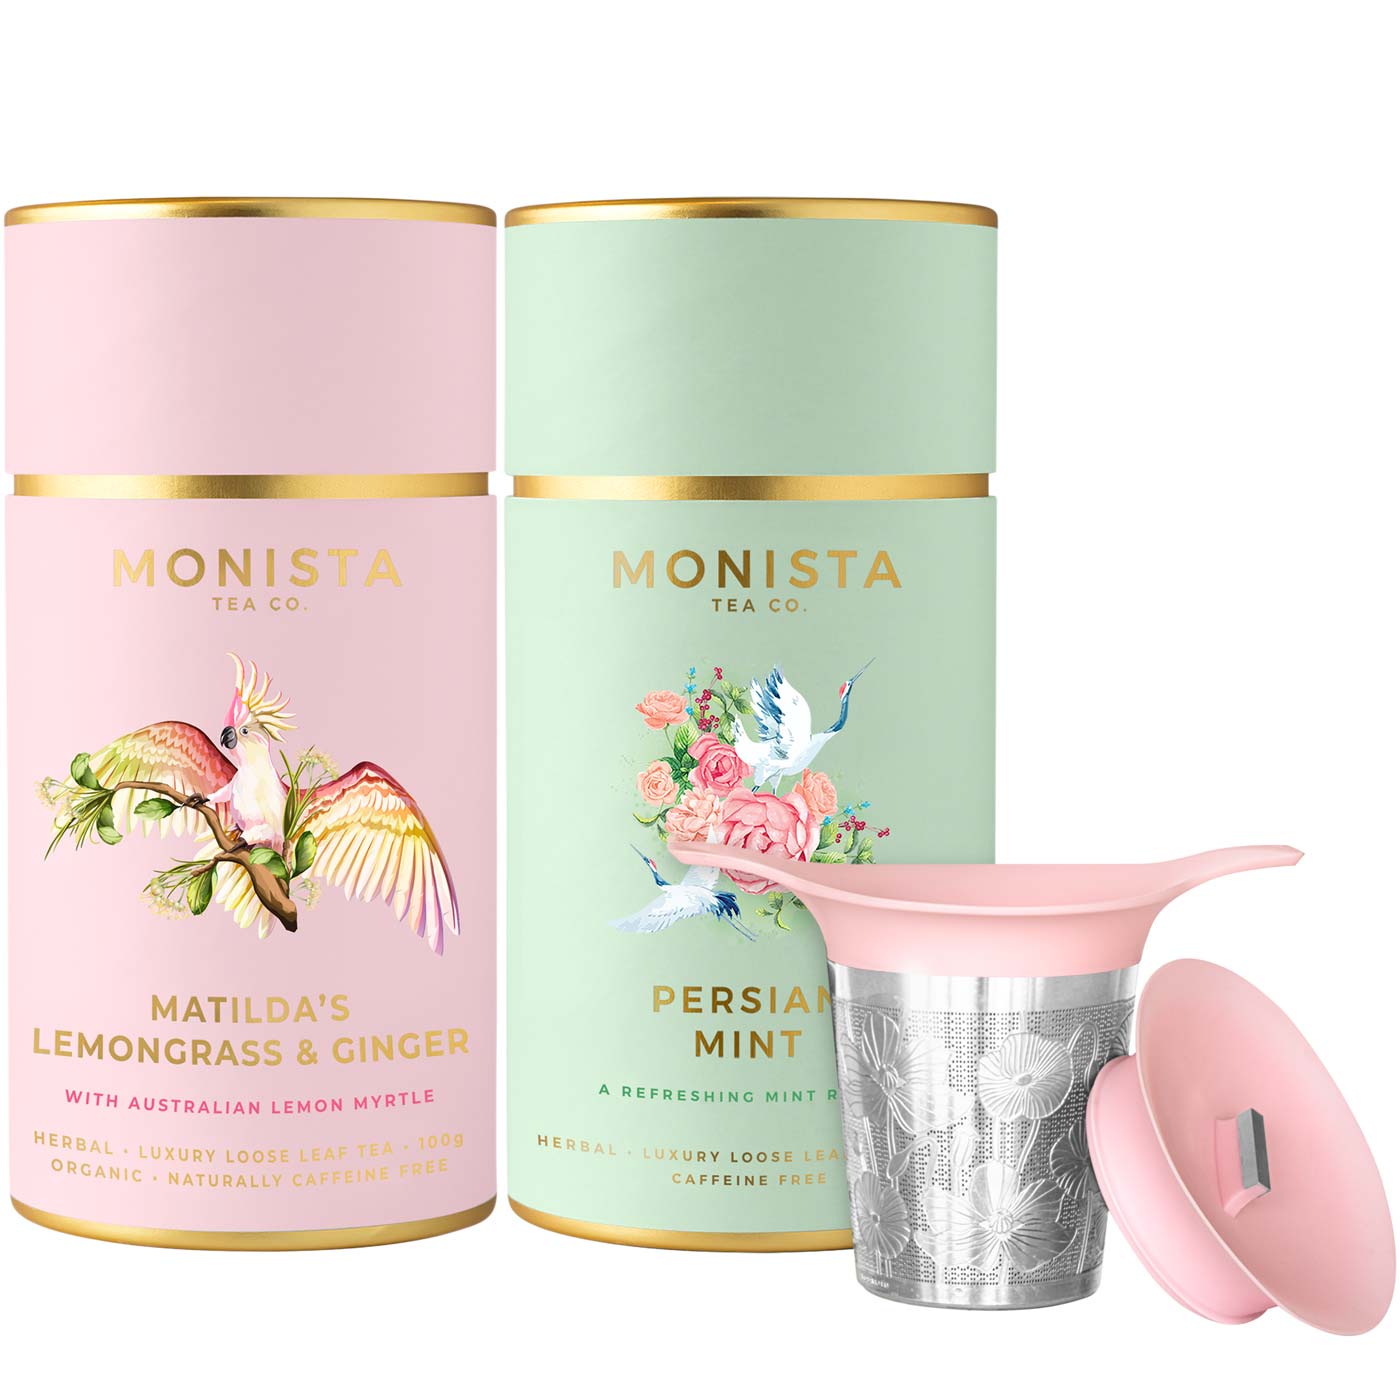 2 tea canisters and a pink tea infuser